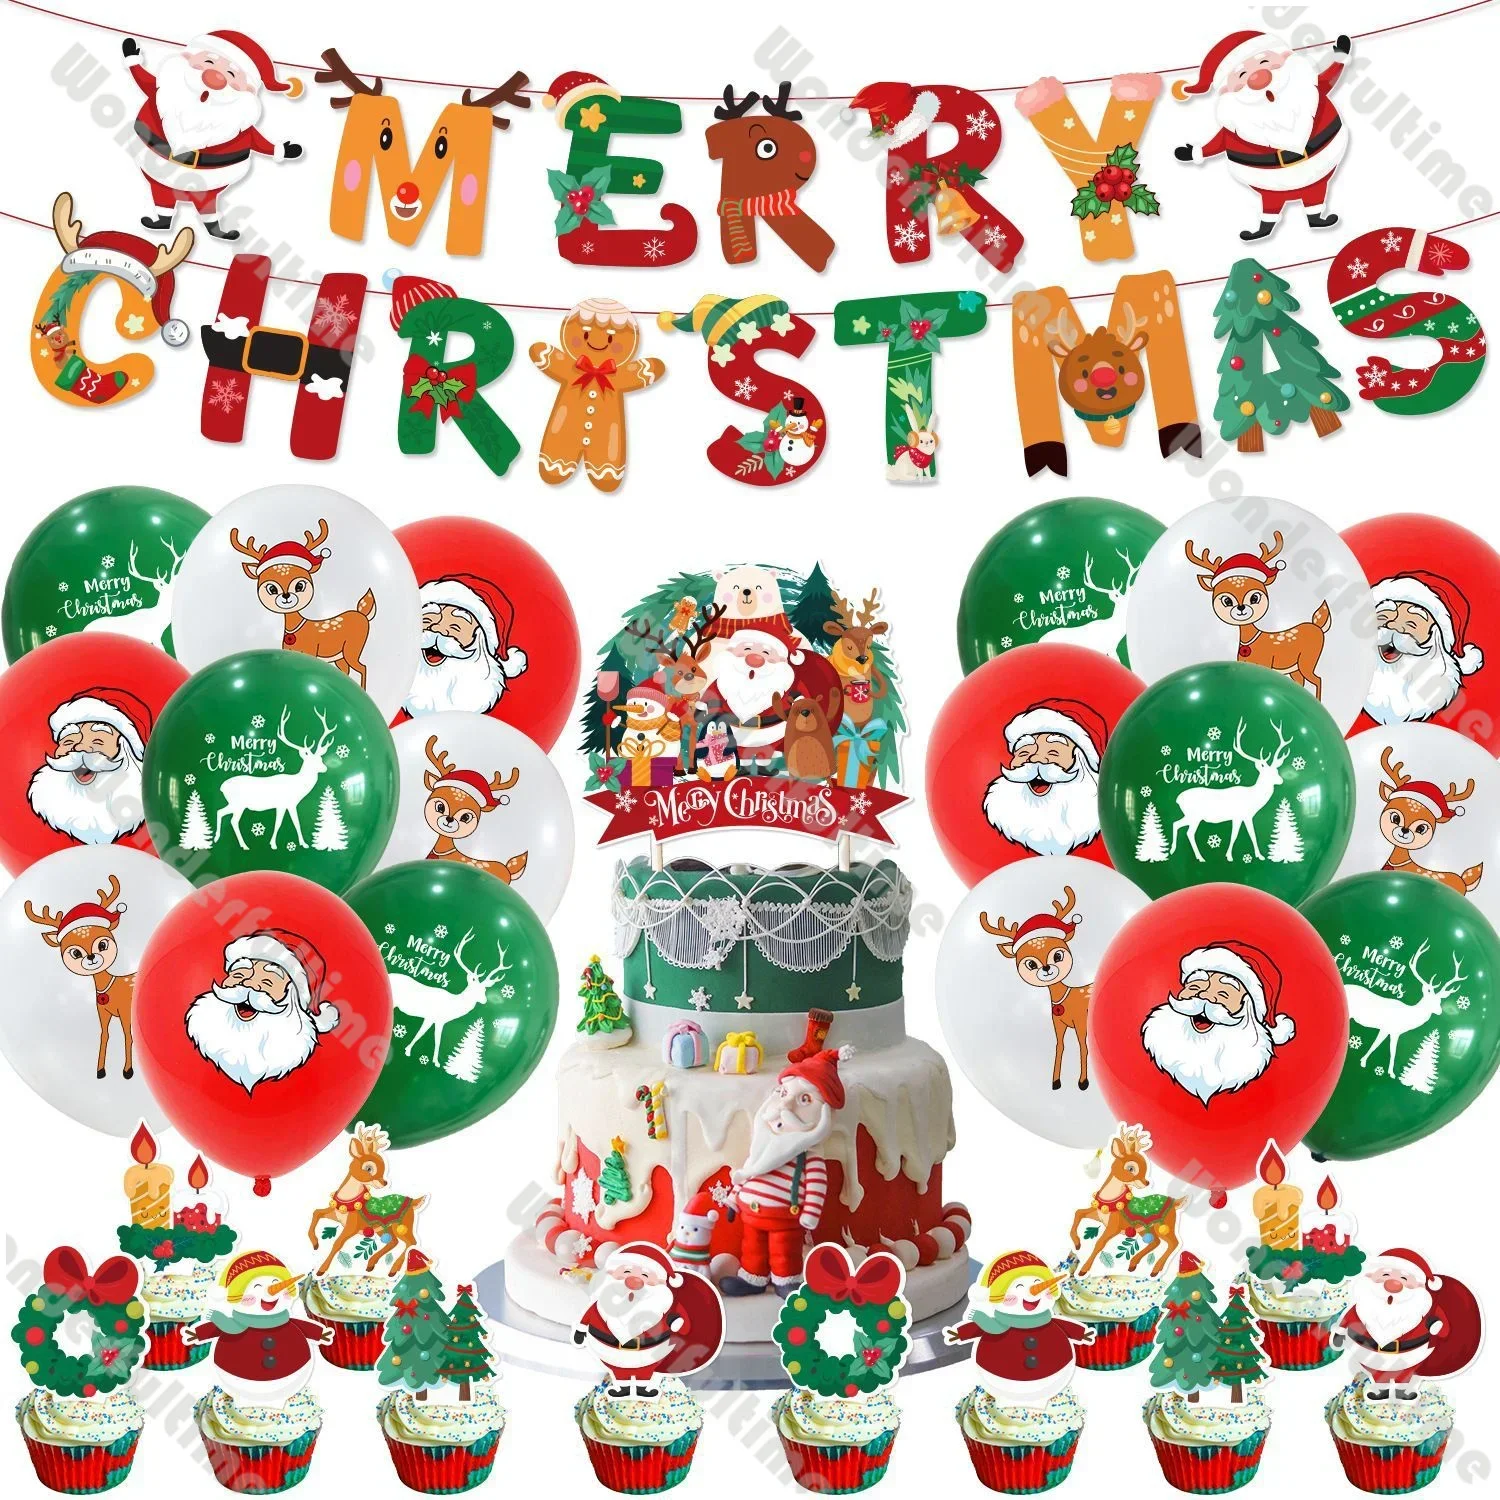 

Christmas Themed Party Decoration Merry Christmas Banner Cake Insert Set Red Green Santa Claus Snowman Balloons Kids Party Decor